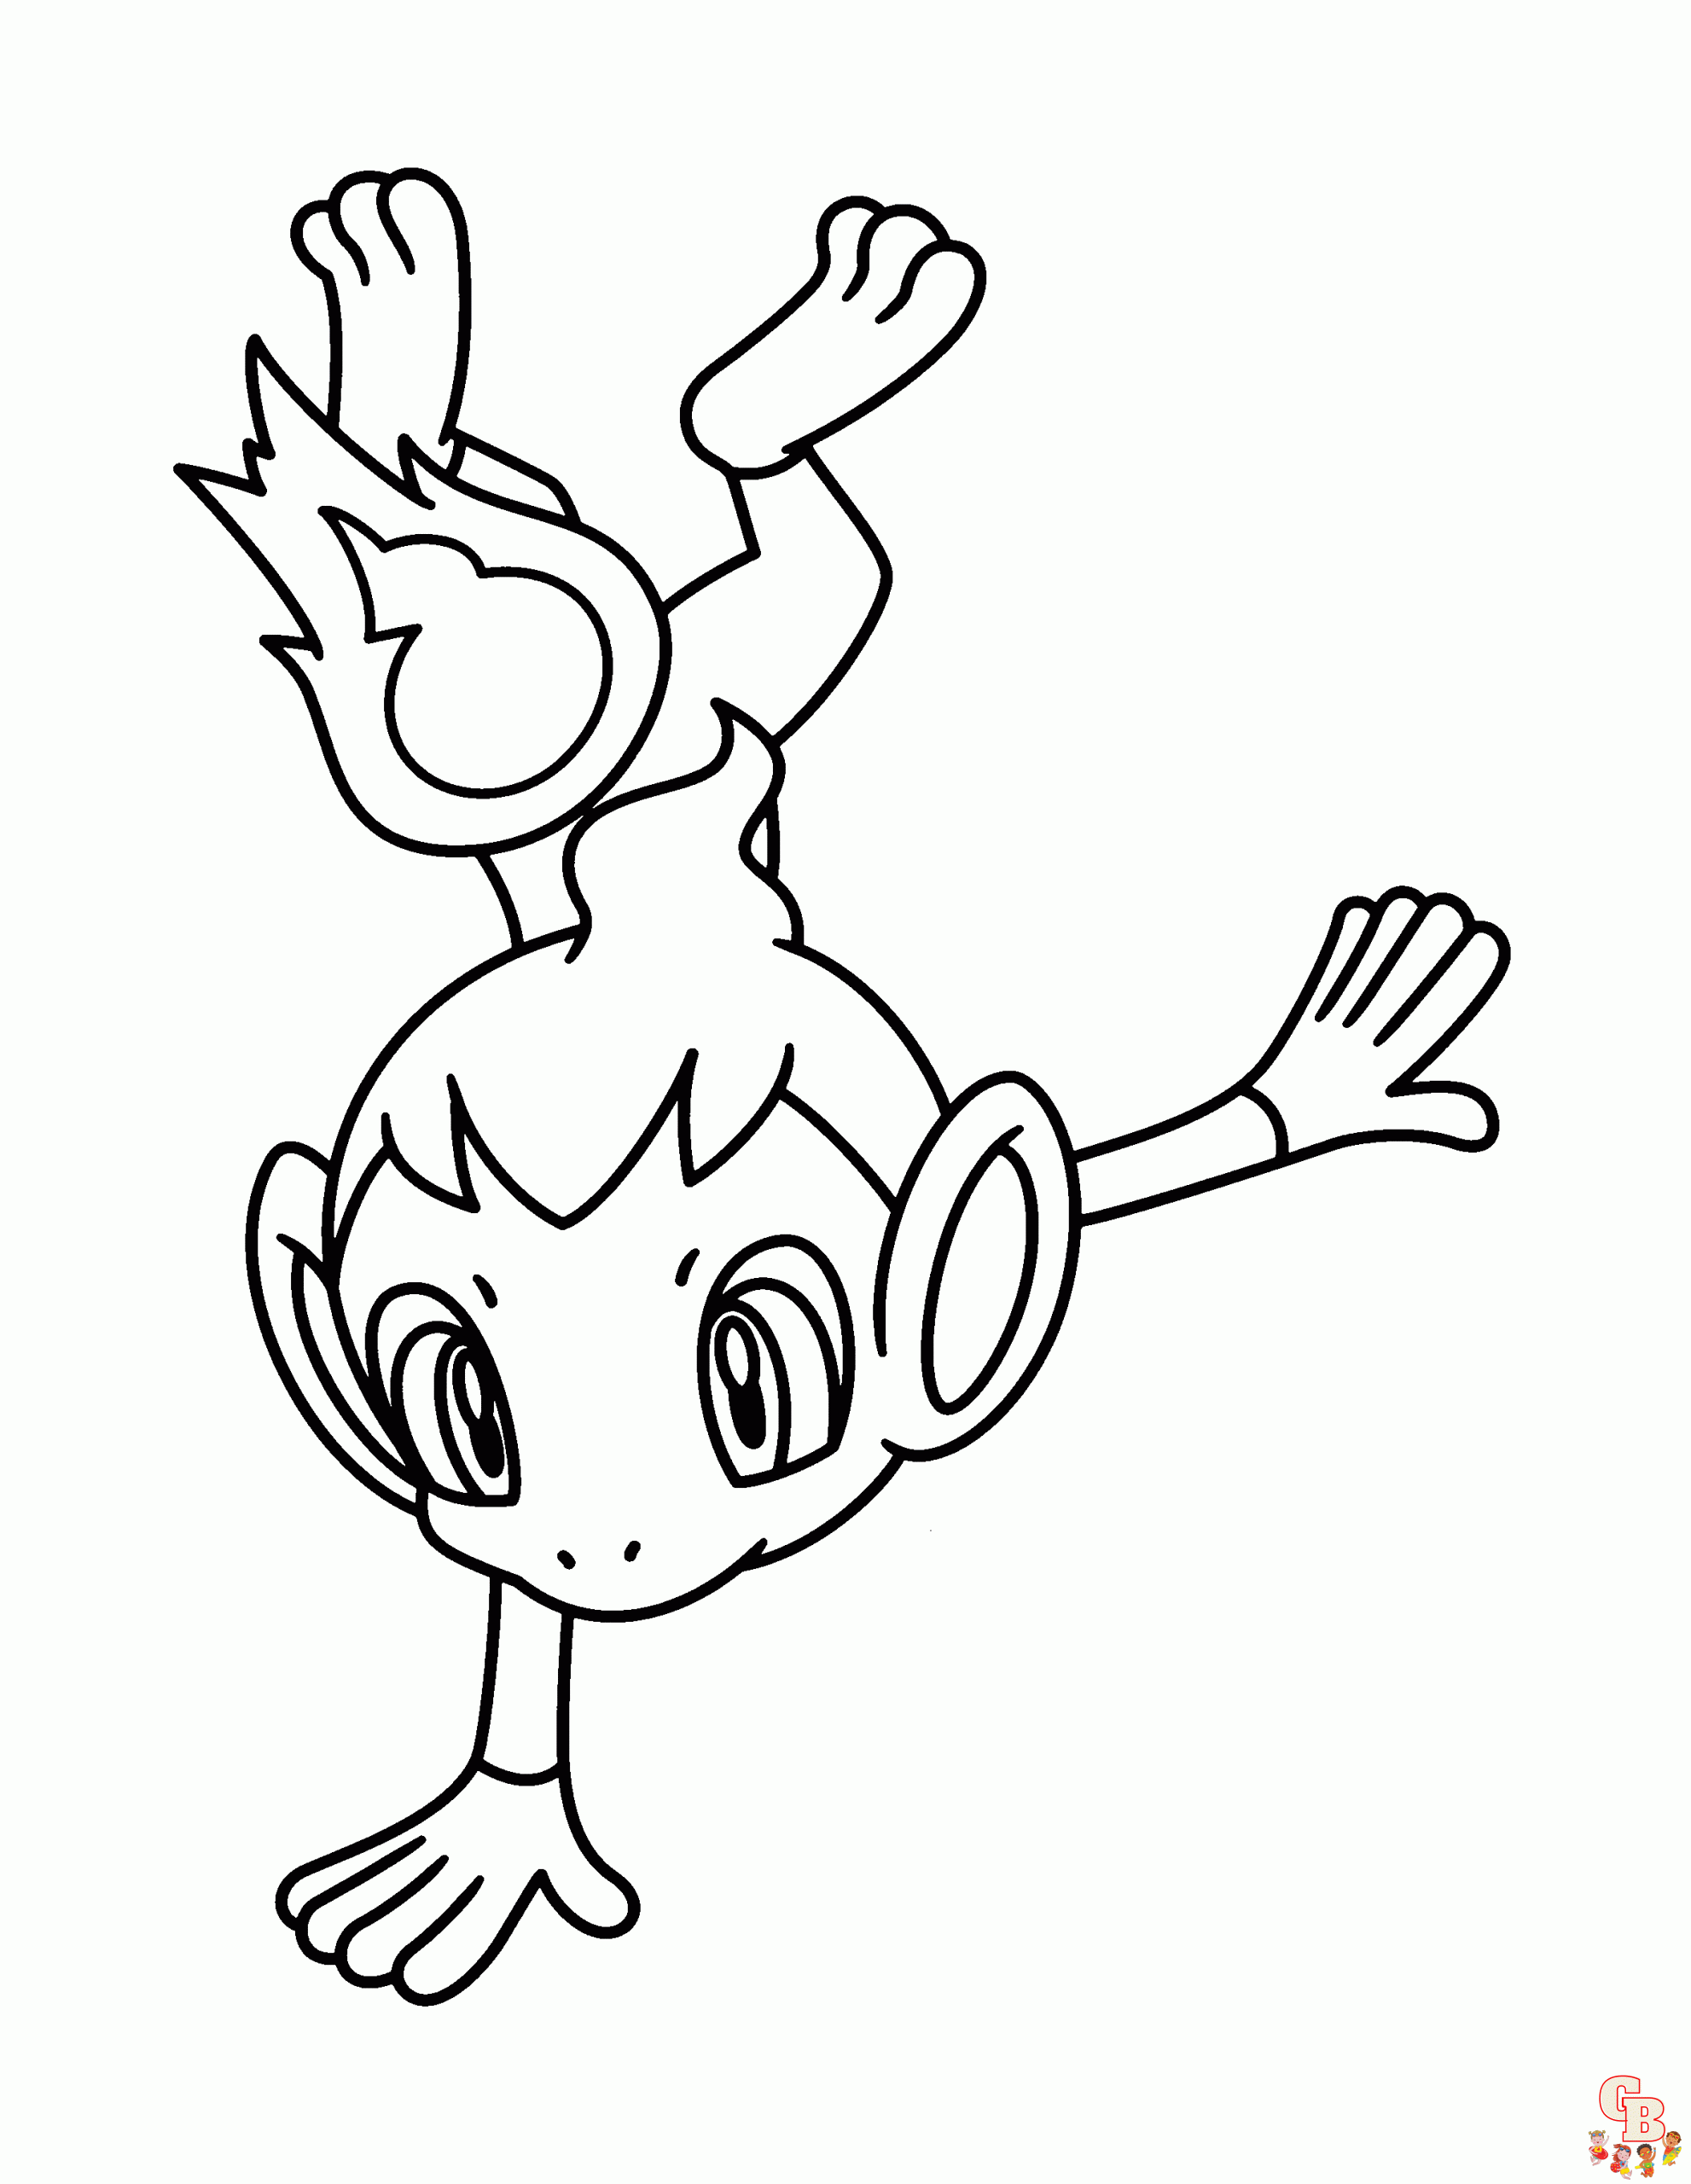 Pokemon Chimchar coloring pages printable free